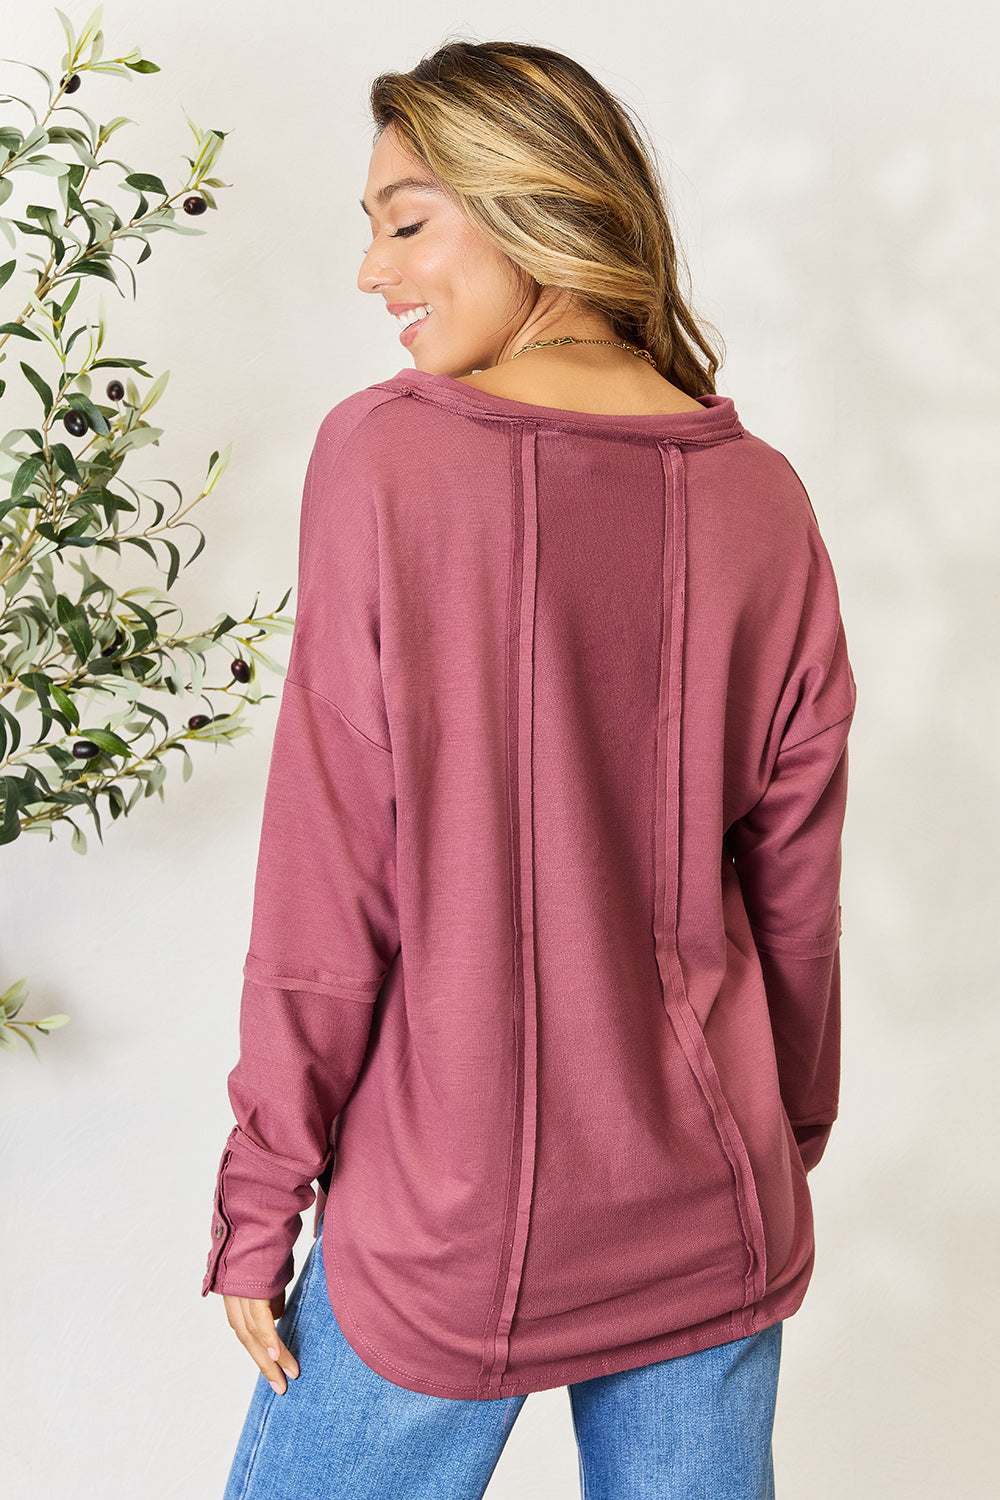 Culture Code Full Size V-Neck Exposed Seam Long Sleeve Blouse - TOPS - Berry